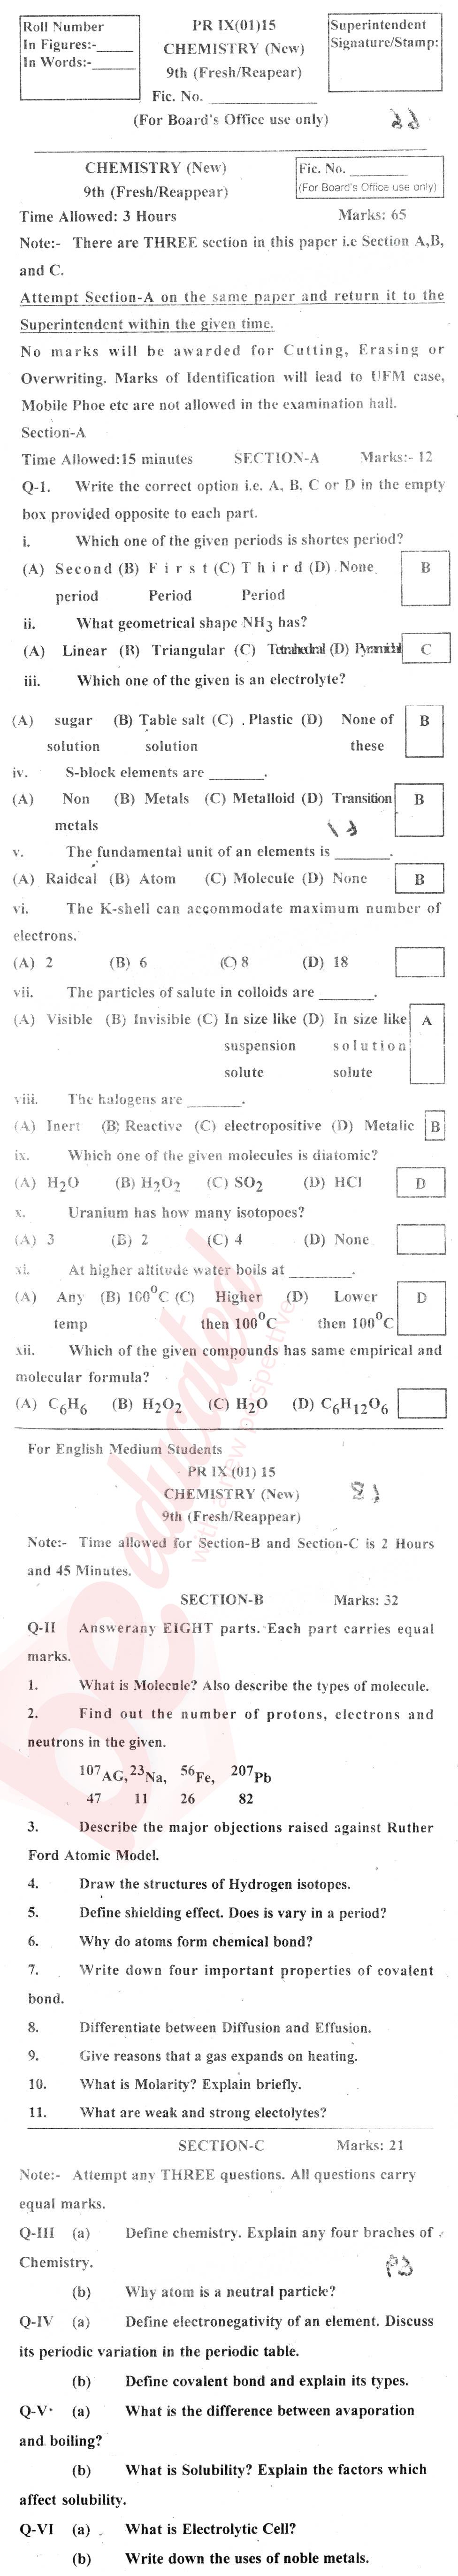 Chemistry 9th English Medium Past Paper Group 1 BISE Abbottabad 2015